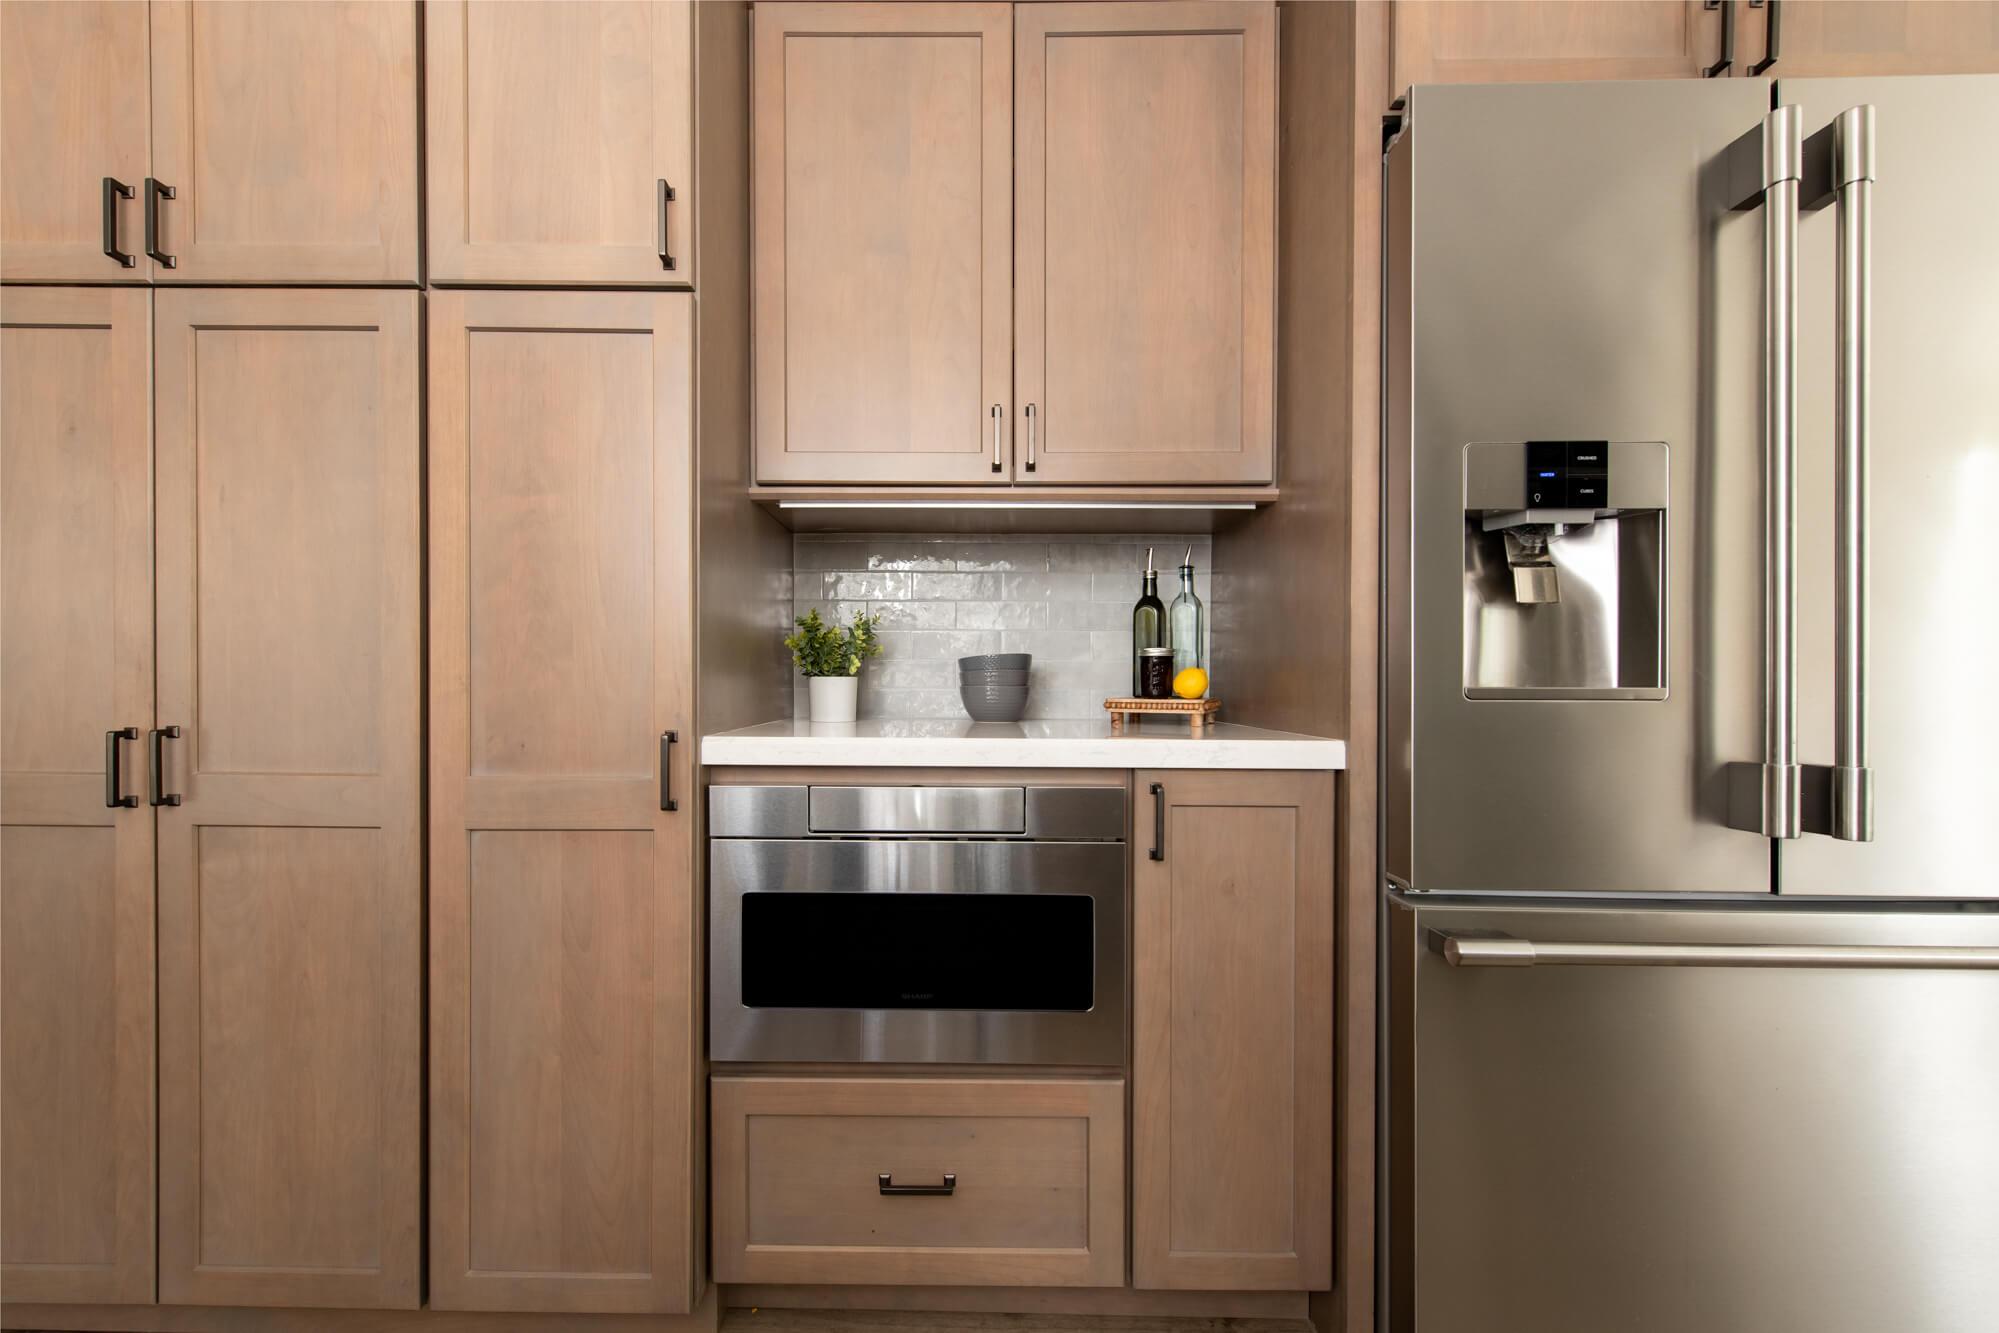 Eco Freindly Remodeling Trends: Low Location for Microwave Drawer Appliance for Universal Design in Kitchen Remodel